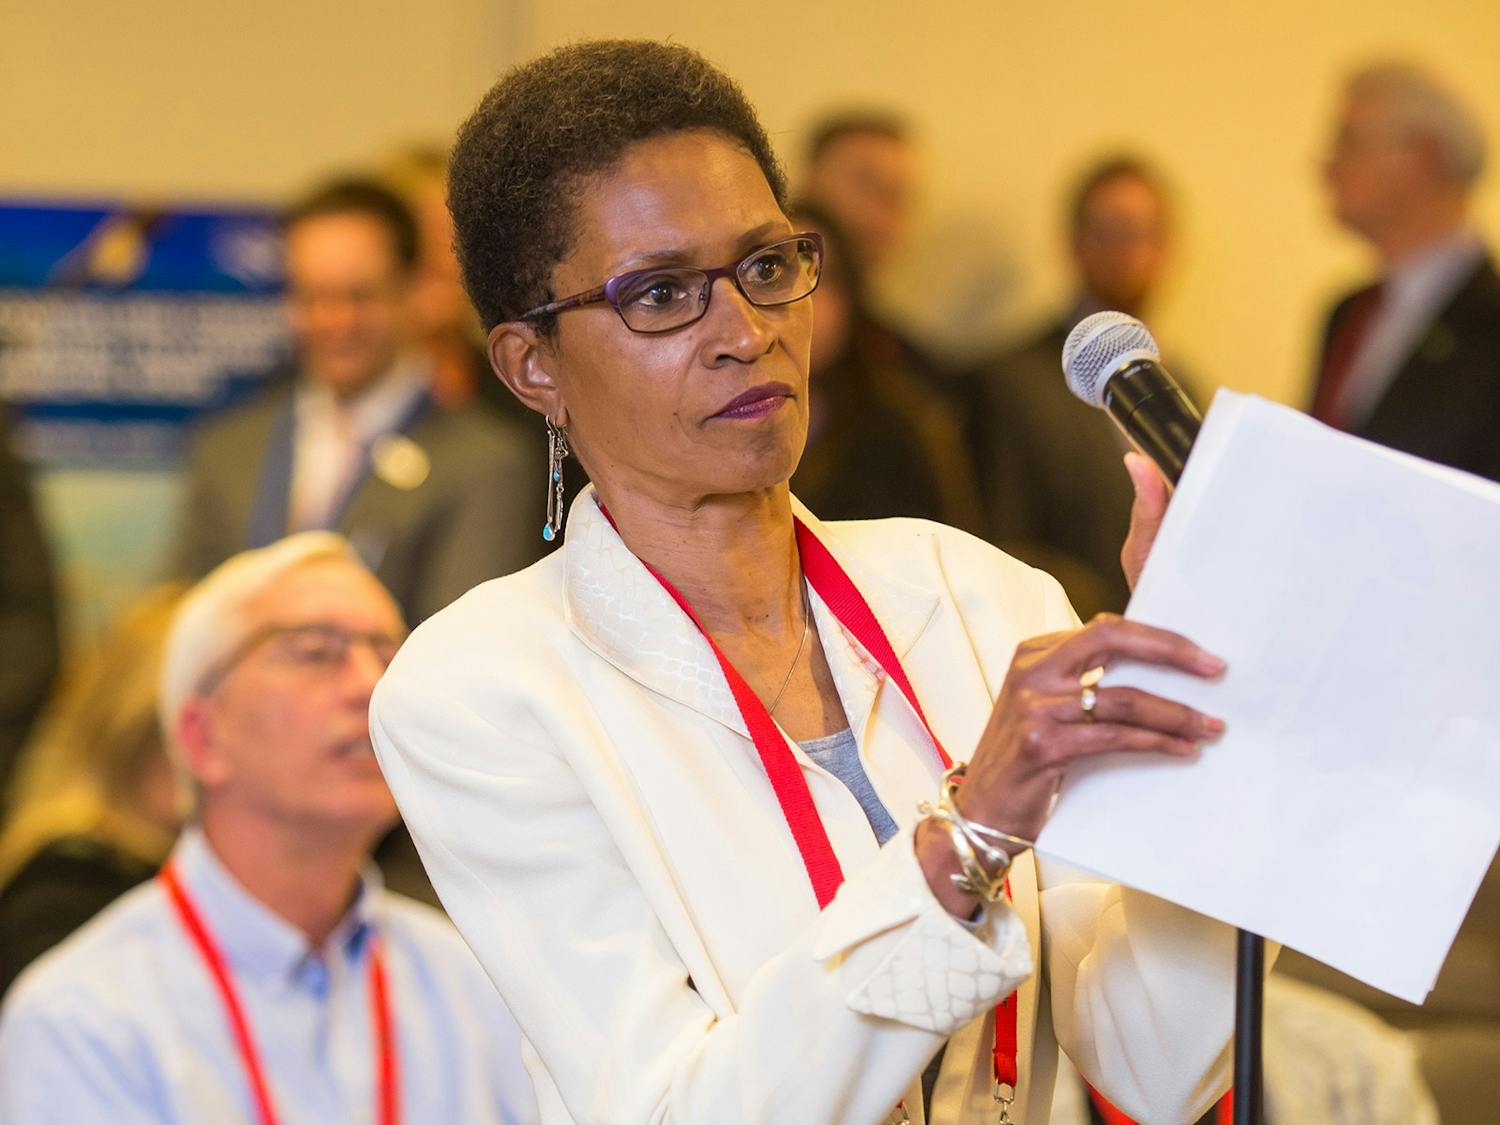 Renee Price, an Orange County Commissioner, speaks at a National Association of Counties Conference. Price was given the M.H. Jack Brock Outstanding County Commissioner Award on Saturday, Aug. 15, 2020. Photo courtesy of the National Association of Counties.